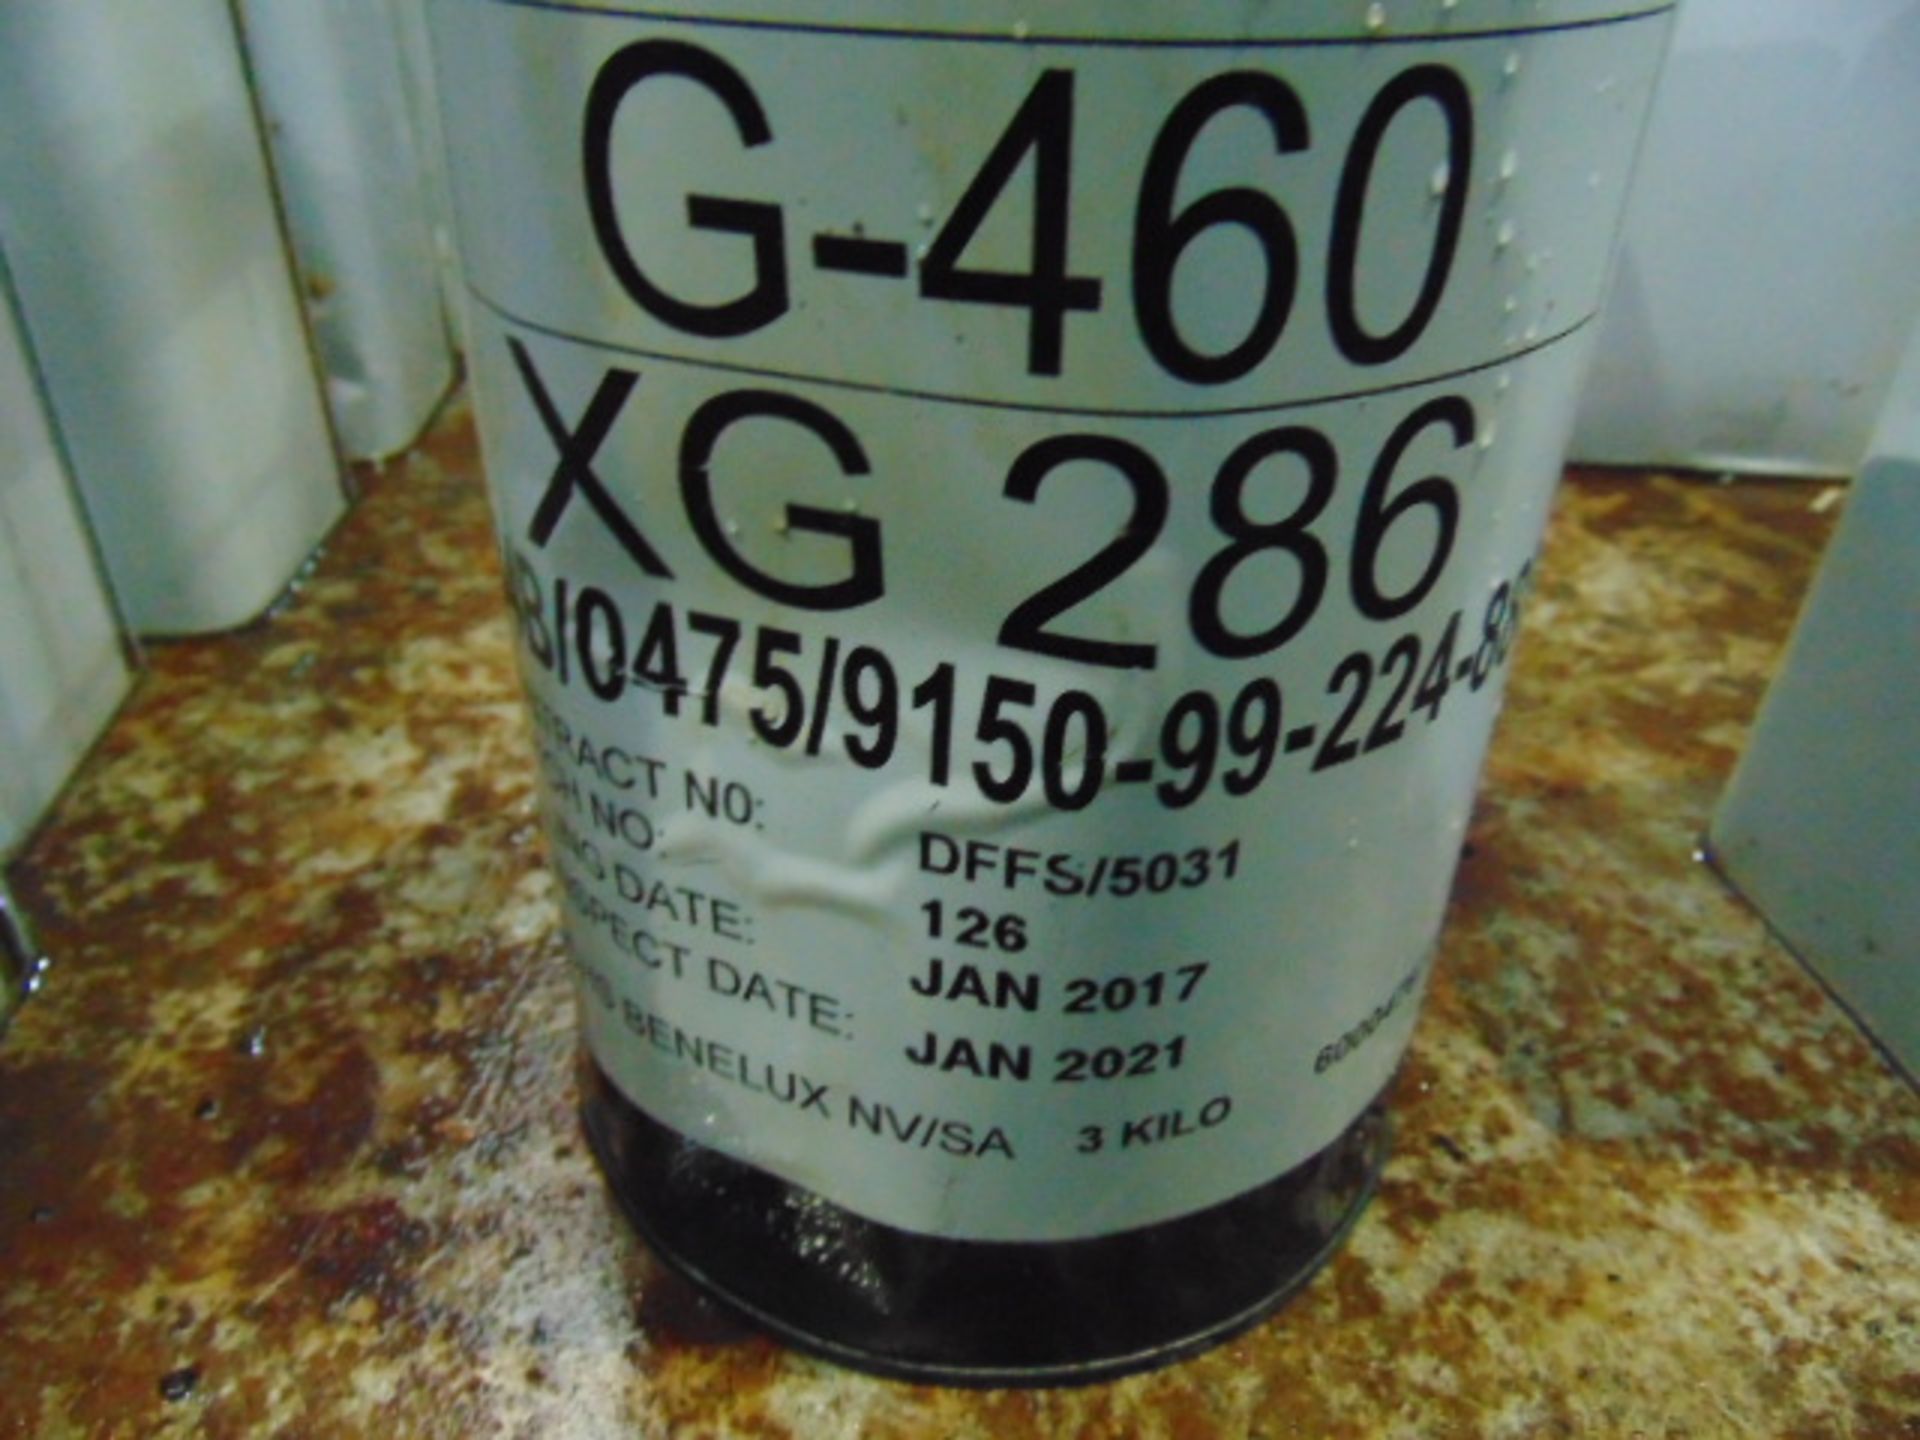 5 x 3 Kilo Cans of G-460/XG-286 Grease Direct from reserve stores - Image 2 of 2